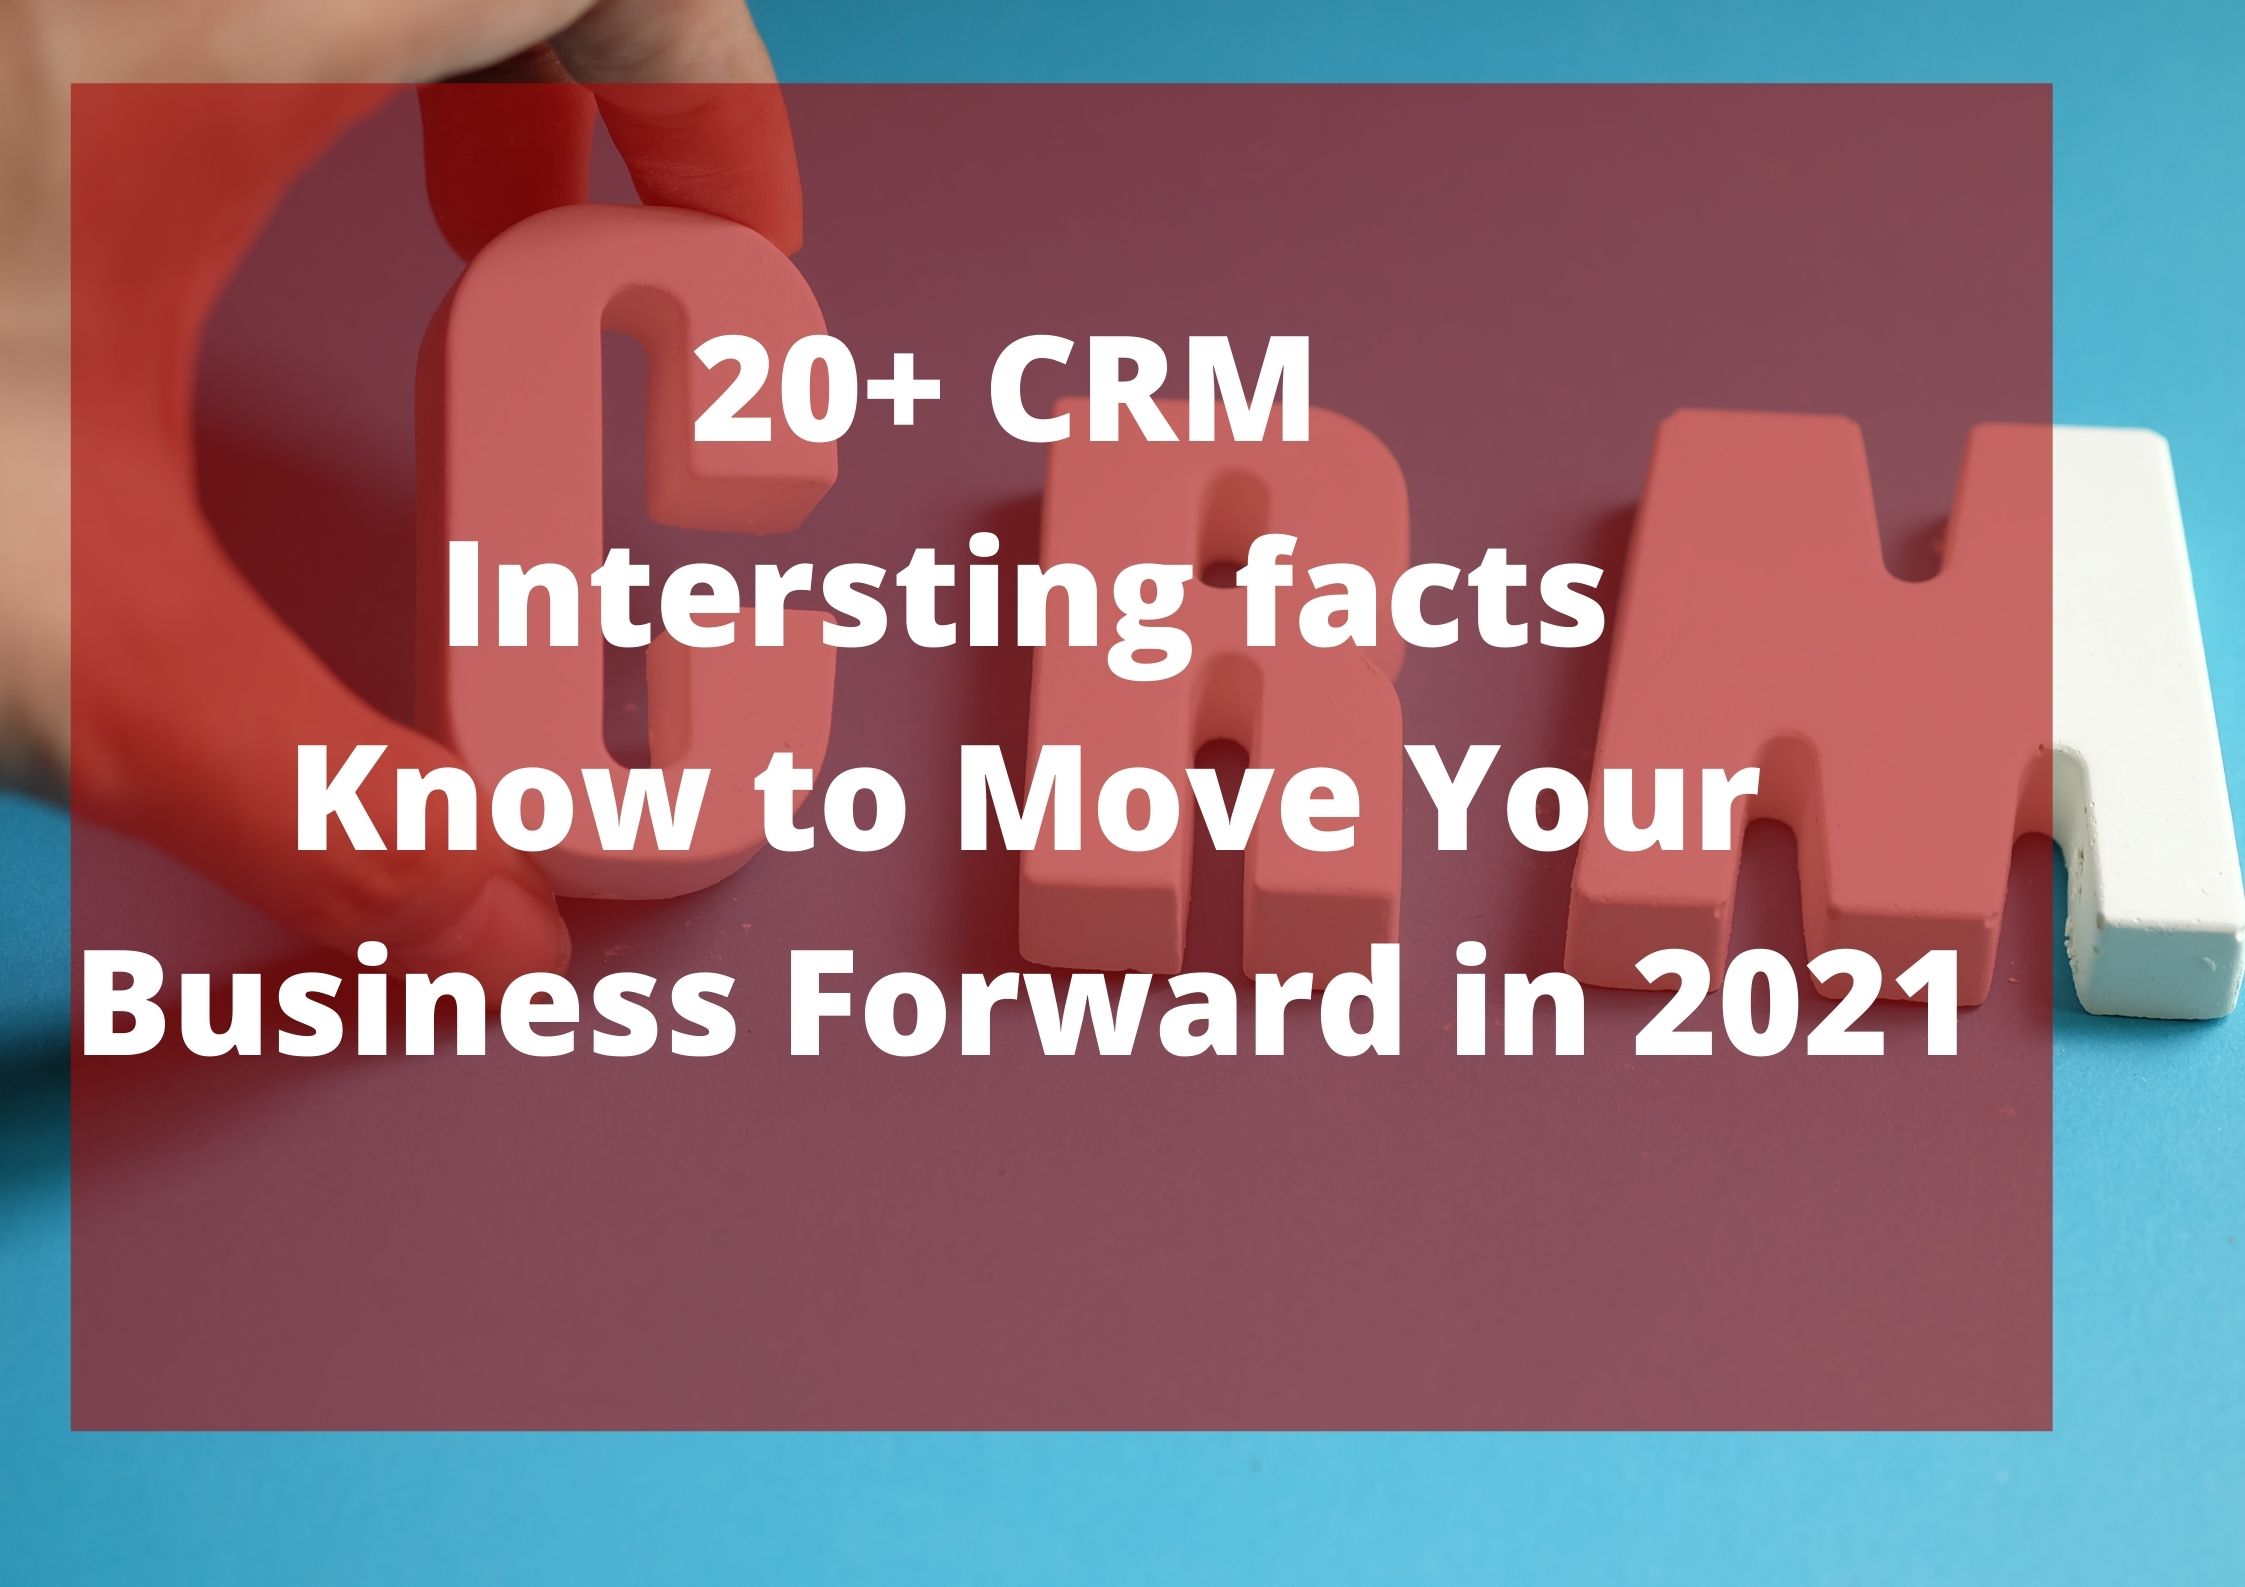 20+ CRM Facts You Should Know in 2021 to Develop Your Business